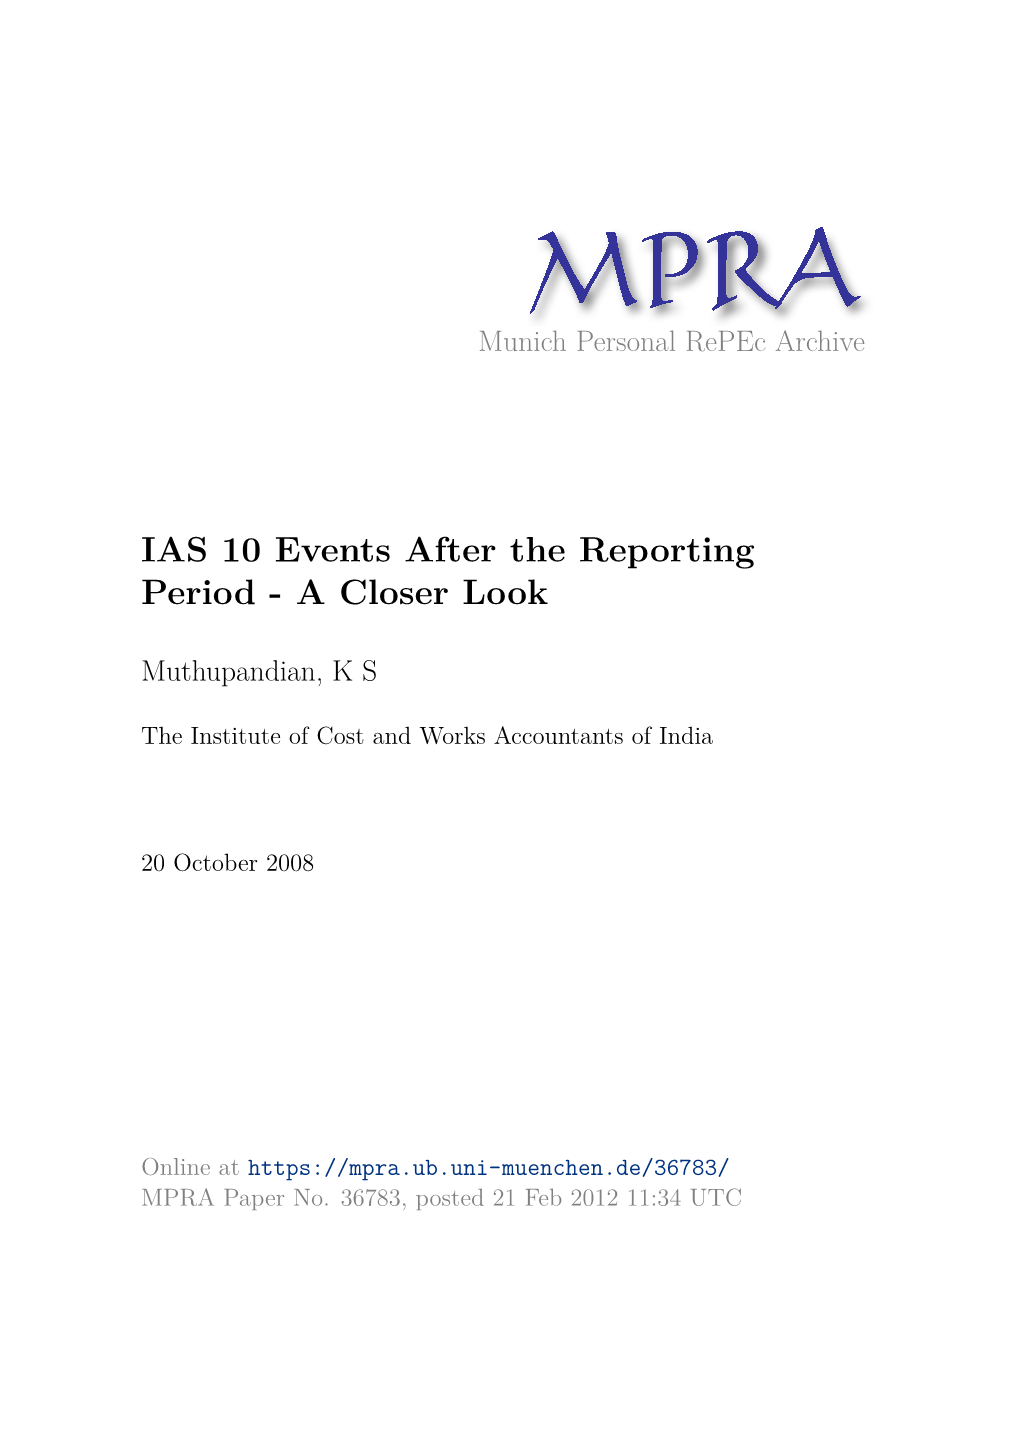 IAS 10 Events After the Reporting Period - a Closer Look